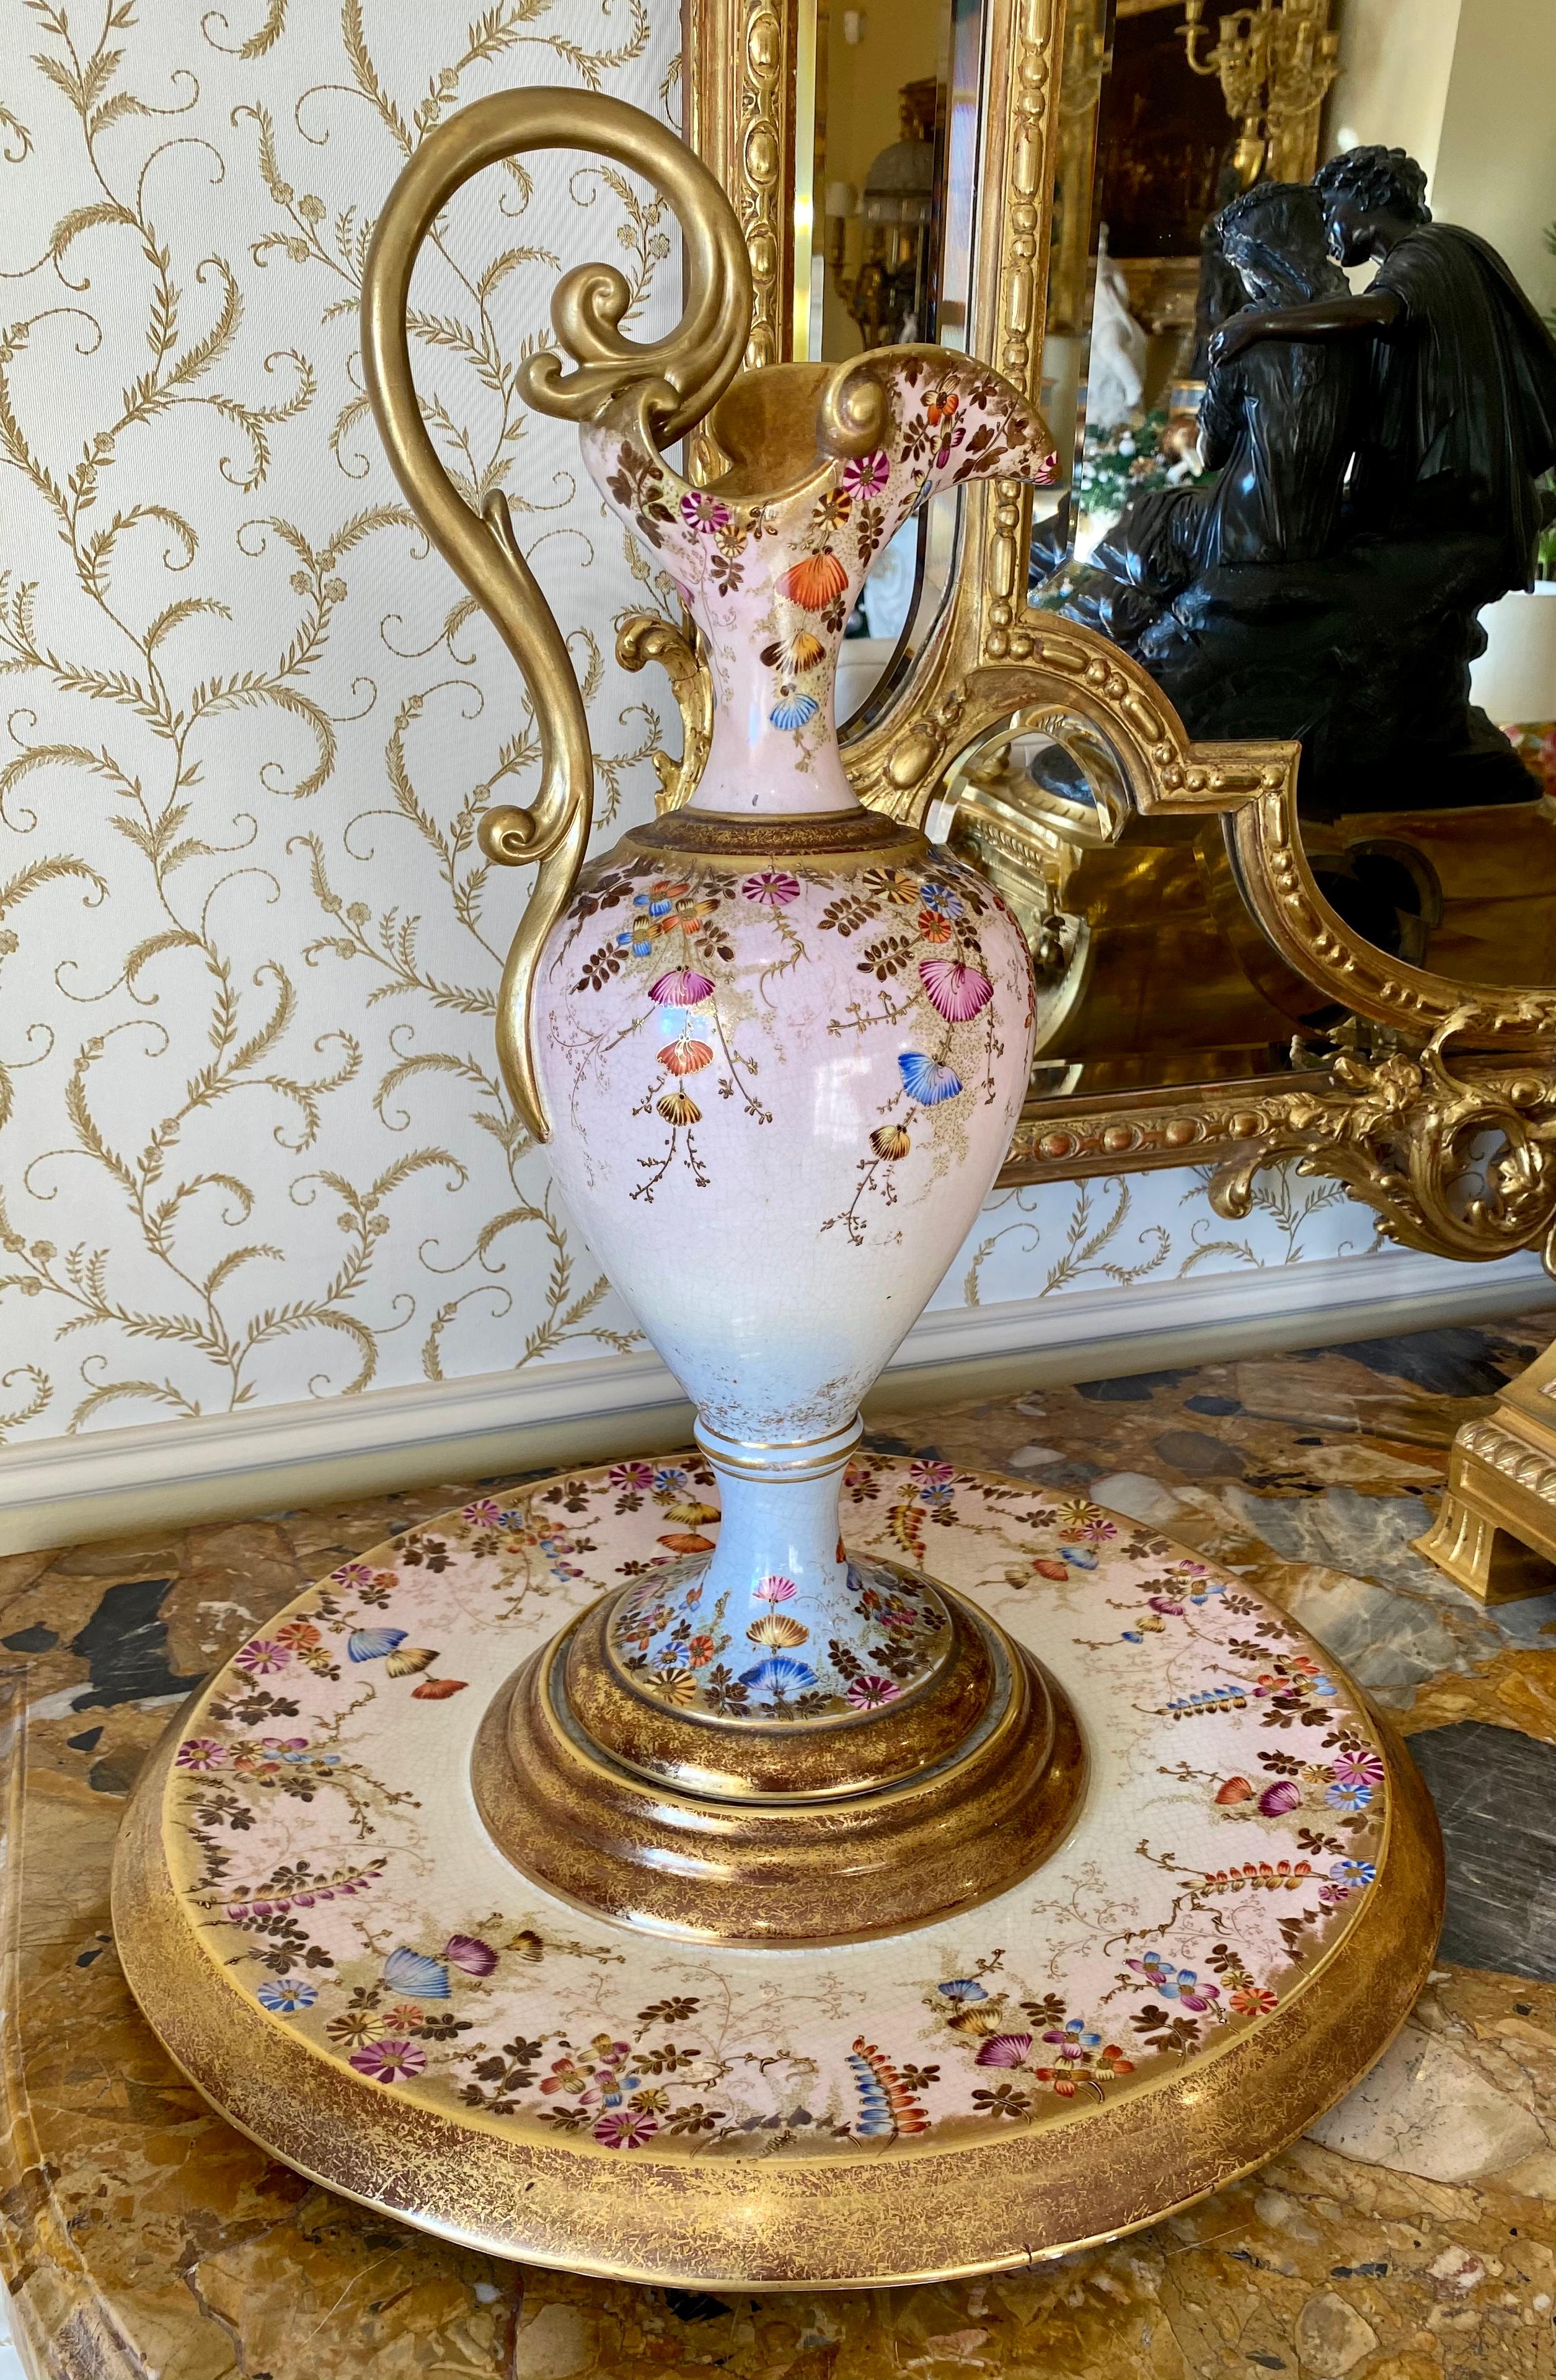 Large ewer on its porcelain dish from Tours signed Gustave ASCH. Beautifully painted with flowers in various and varied colors, this magnificent set is in very good condition.
Dimensions
Total height 50cm
Ewer - H 45,5cm 
Dish - D 42cm.